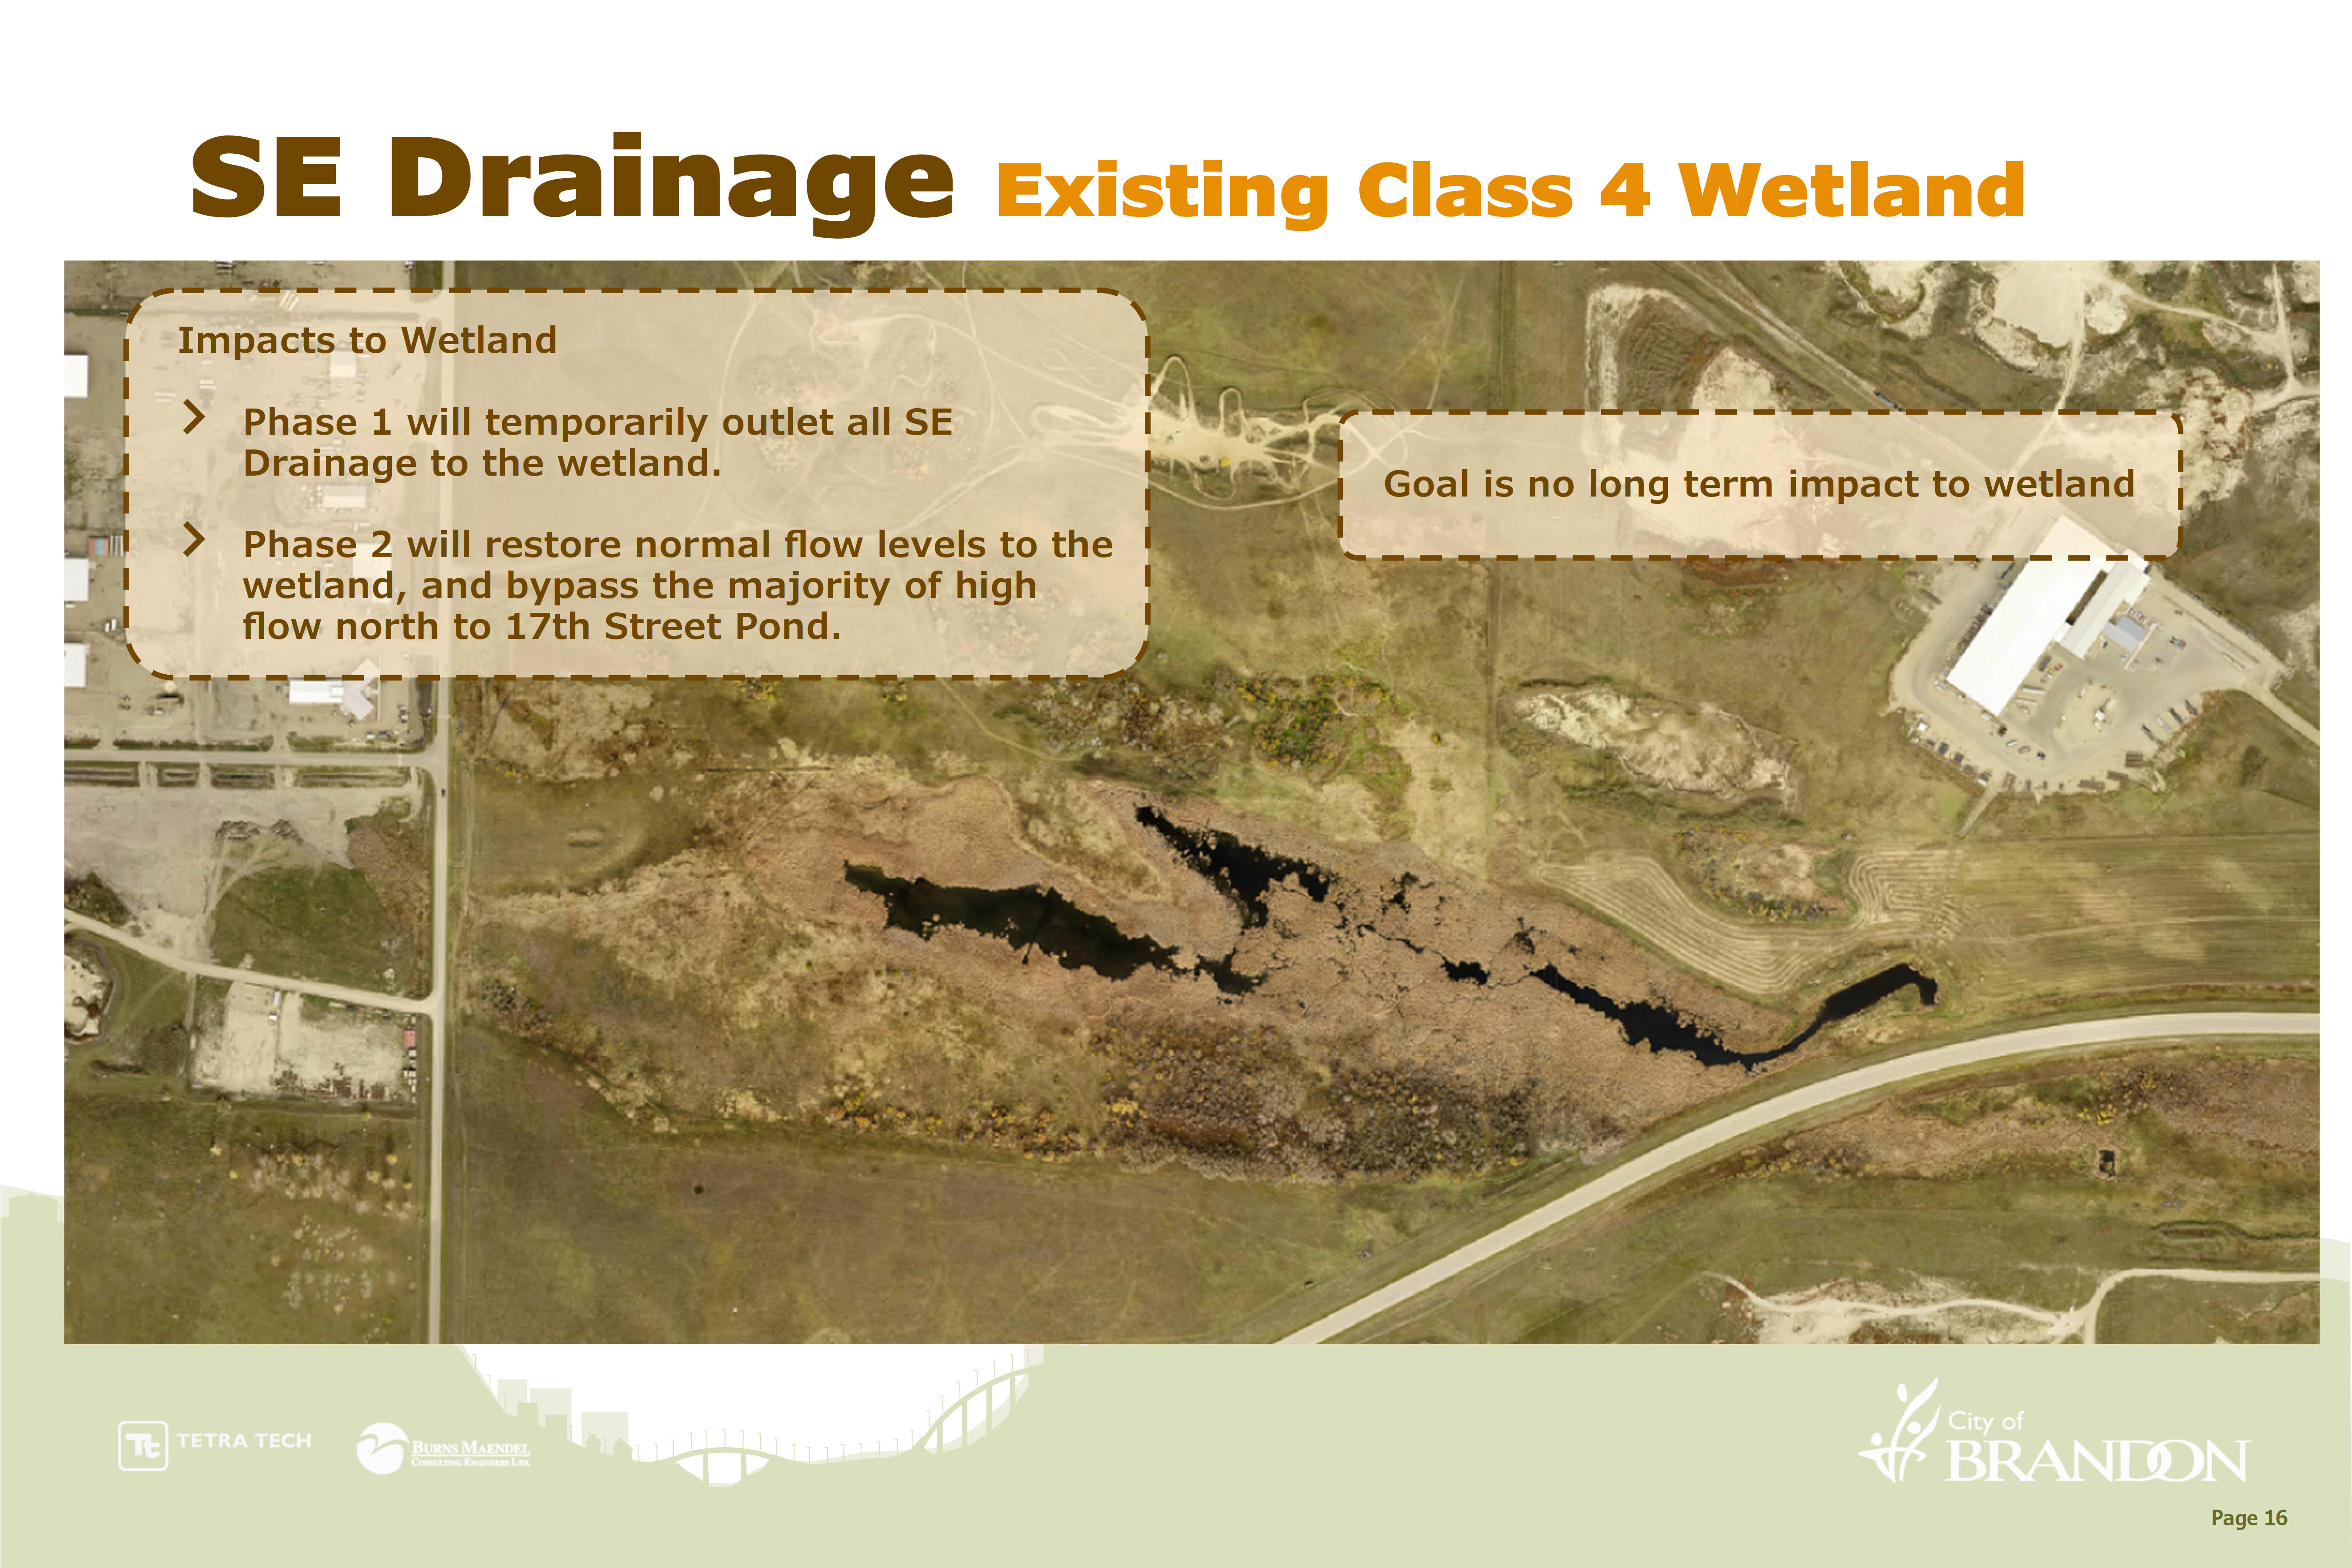 Southeast Drainage Existing Class 4 Wetland